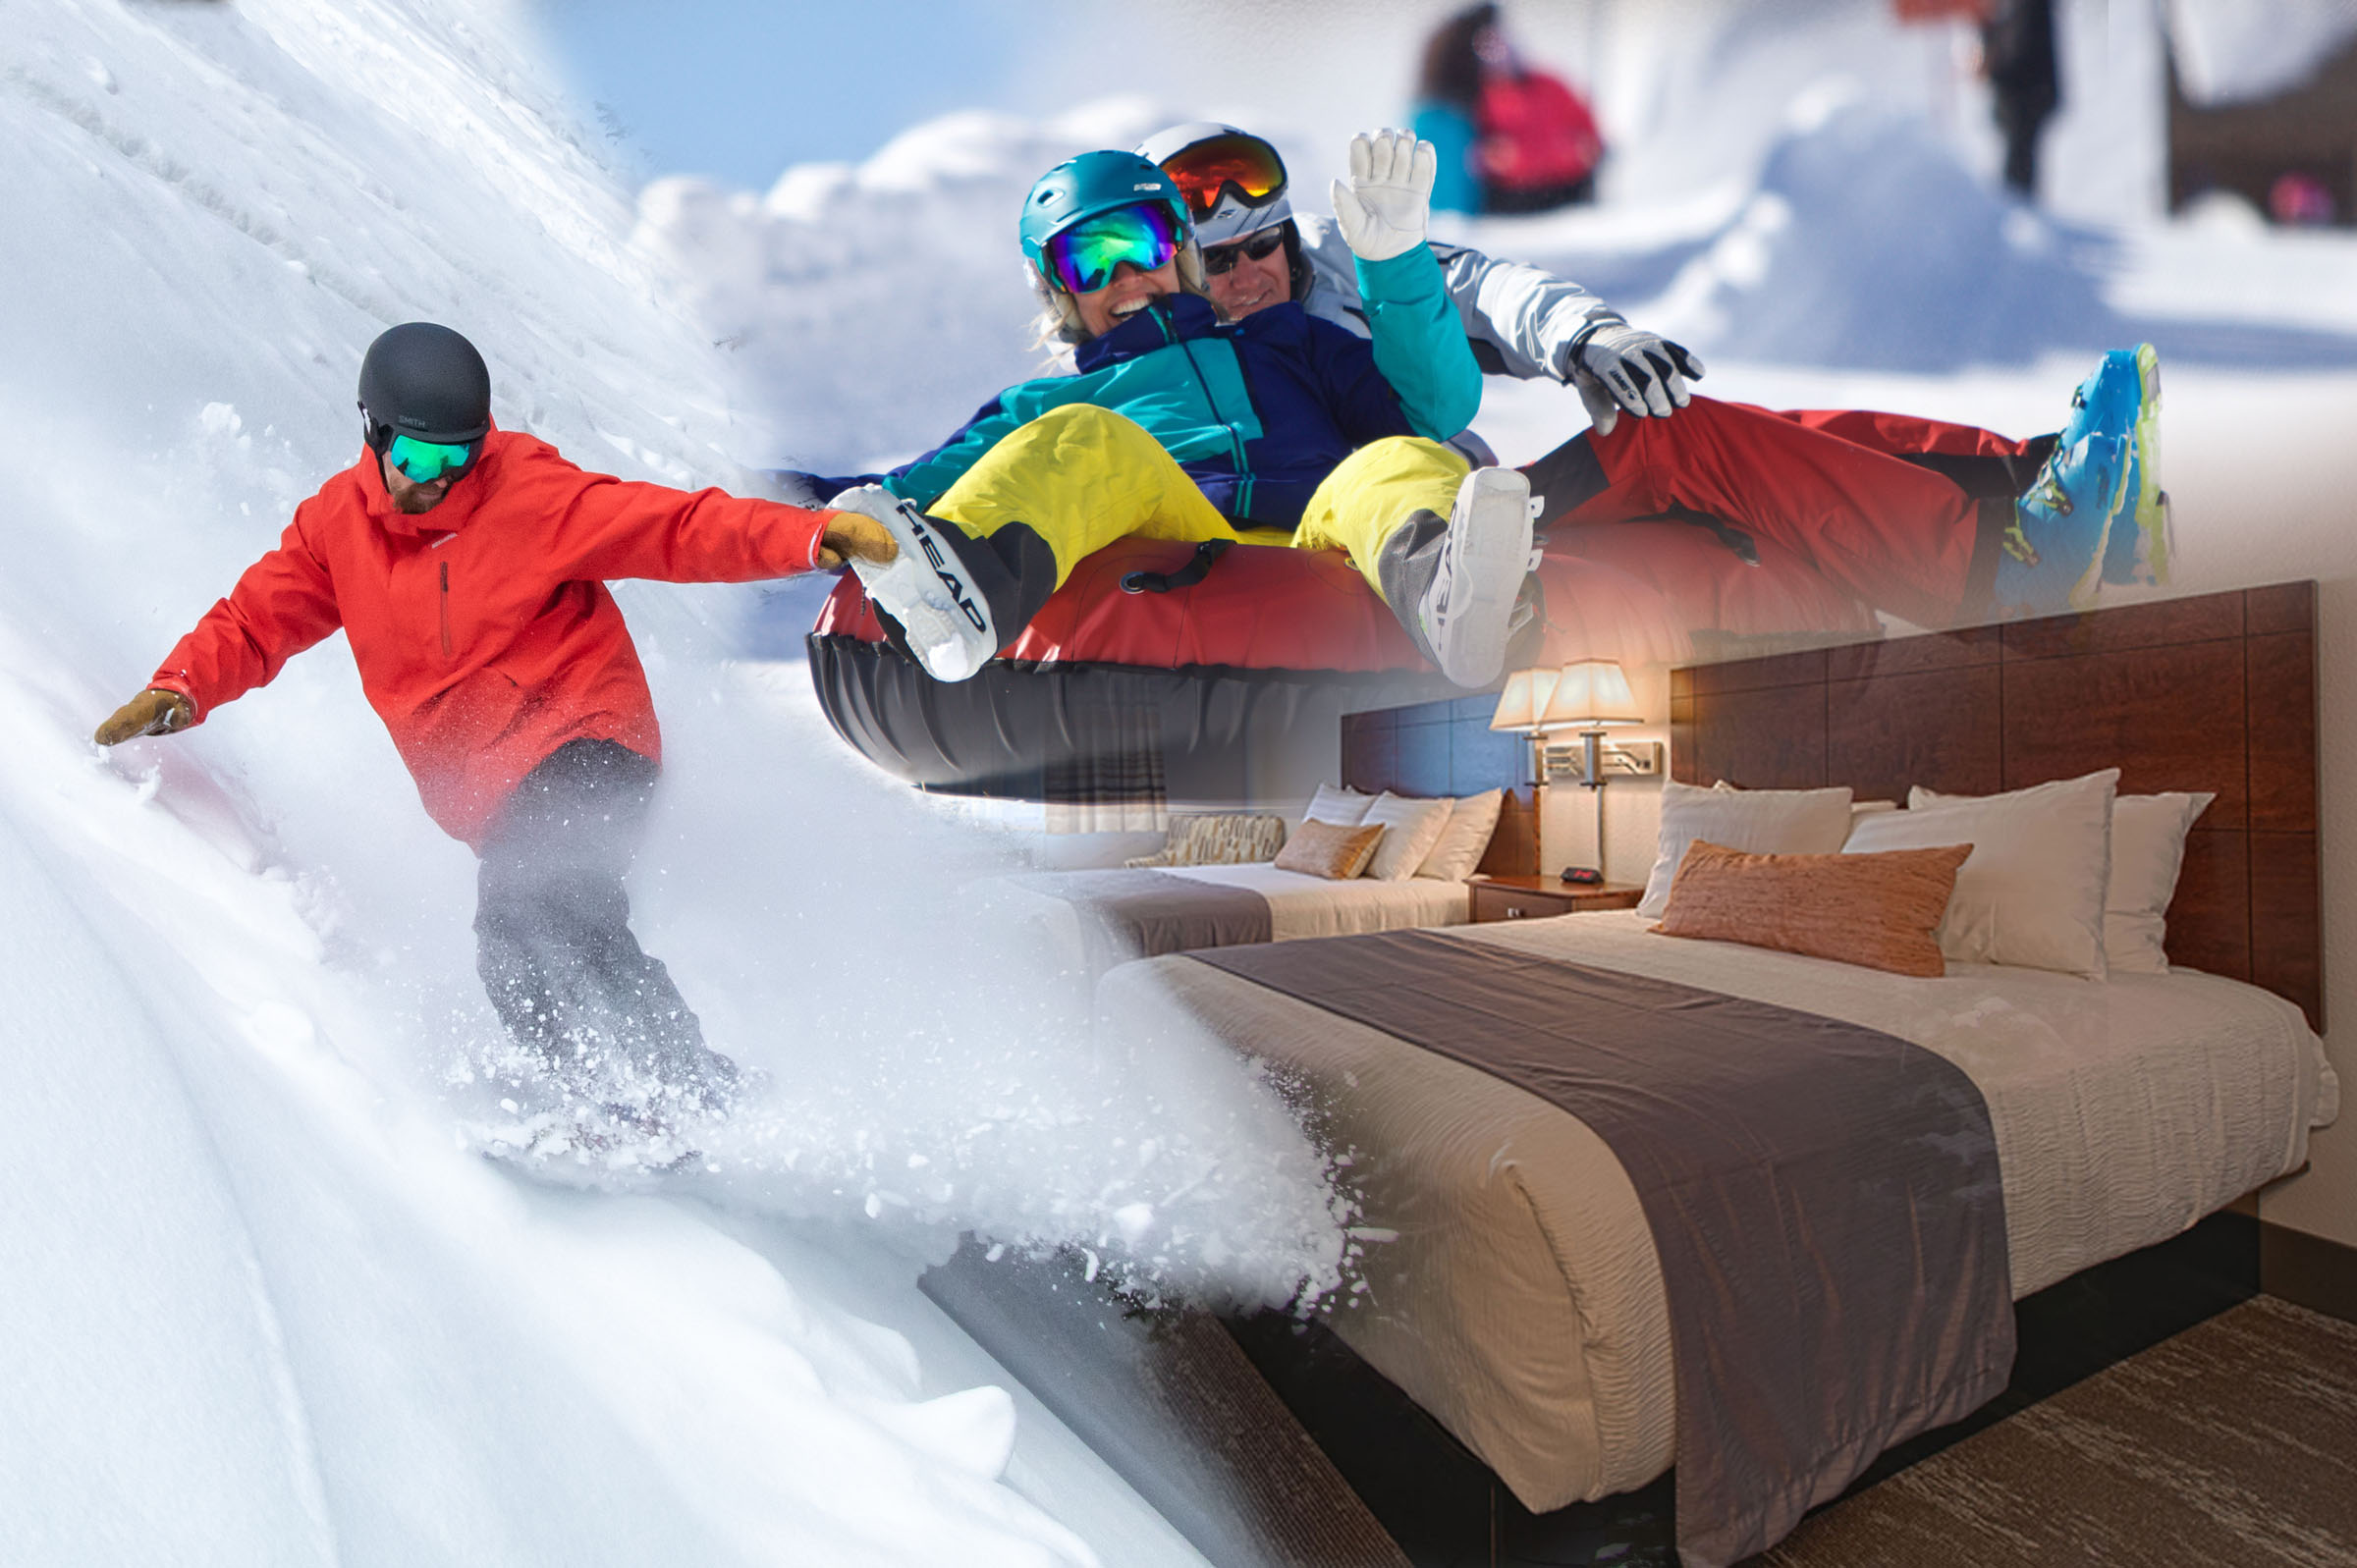 Snowboarder, snow tubers, and room